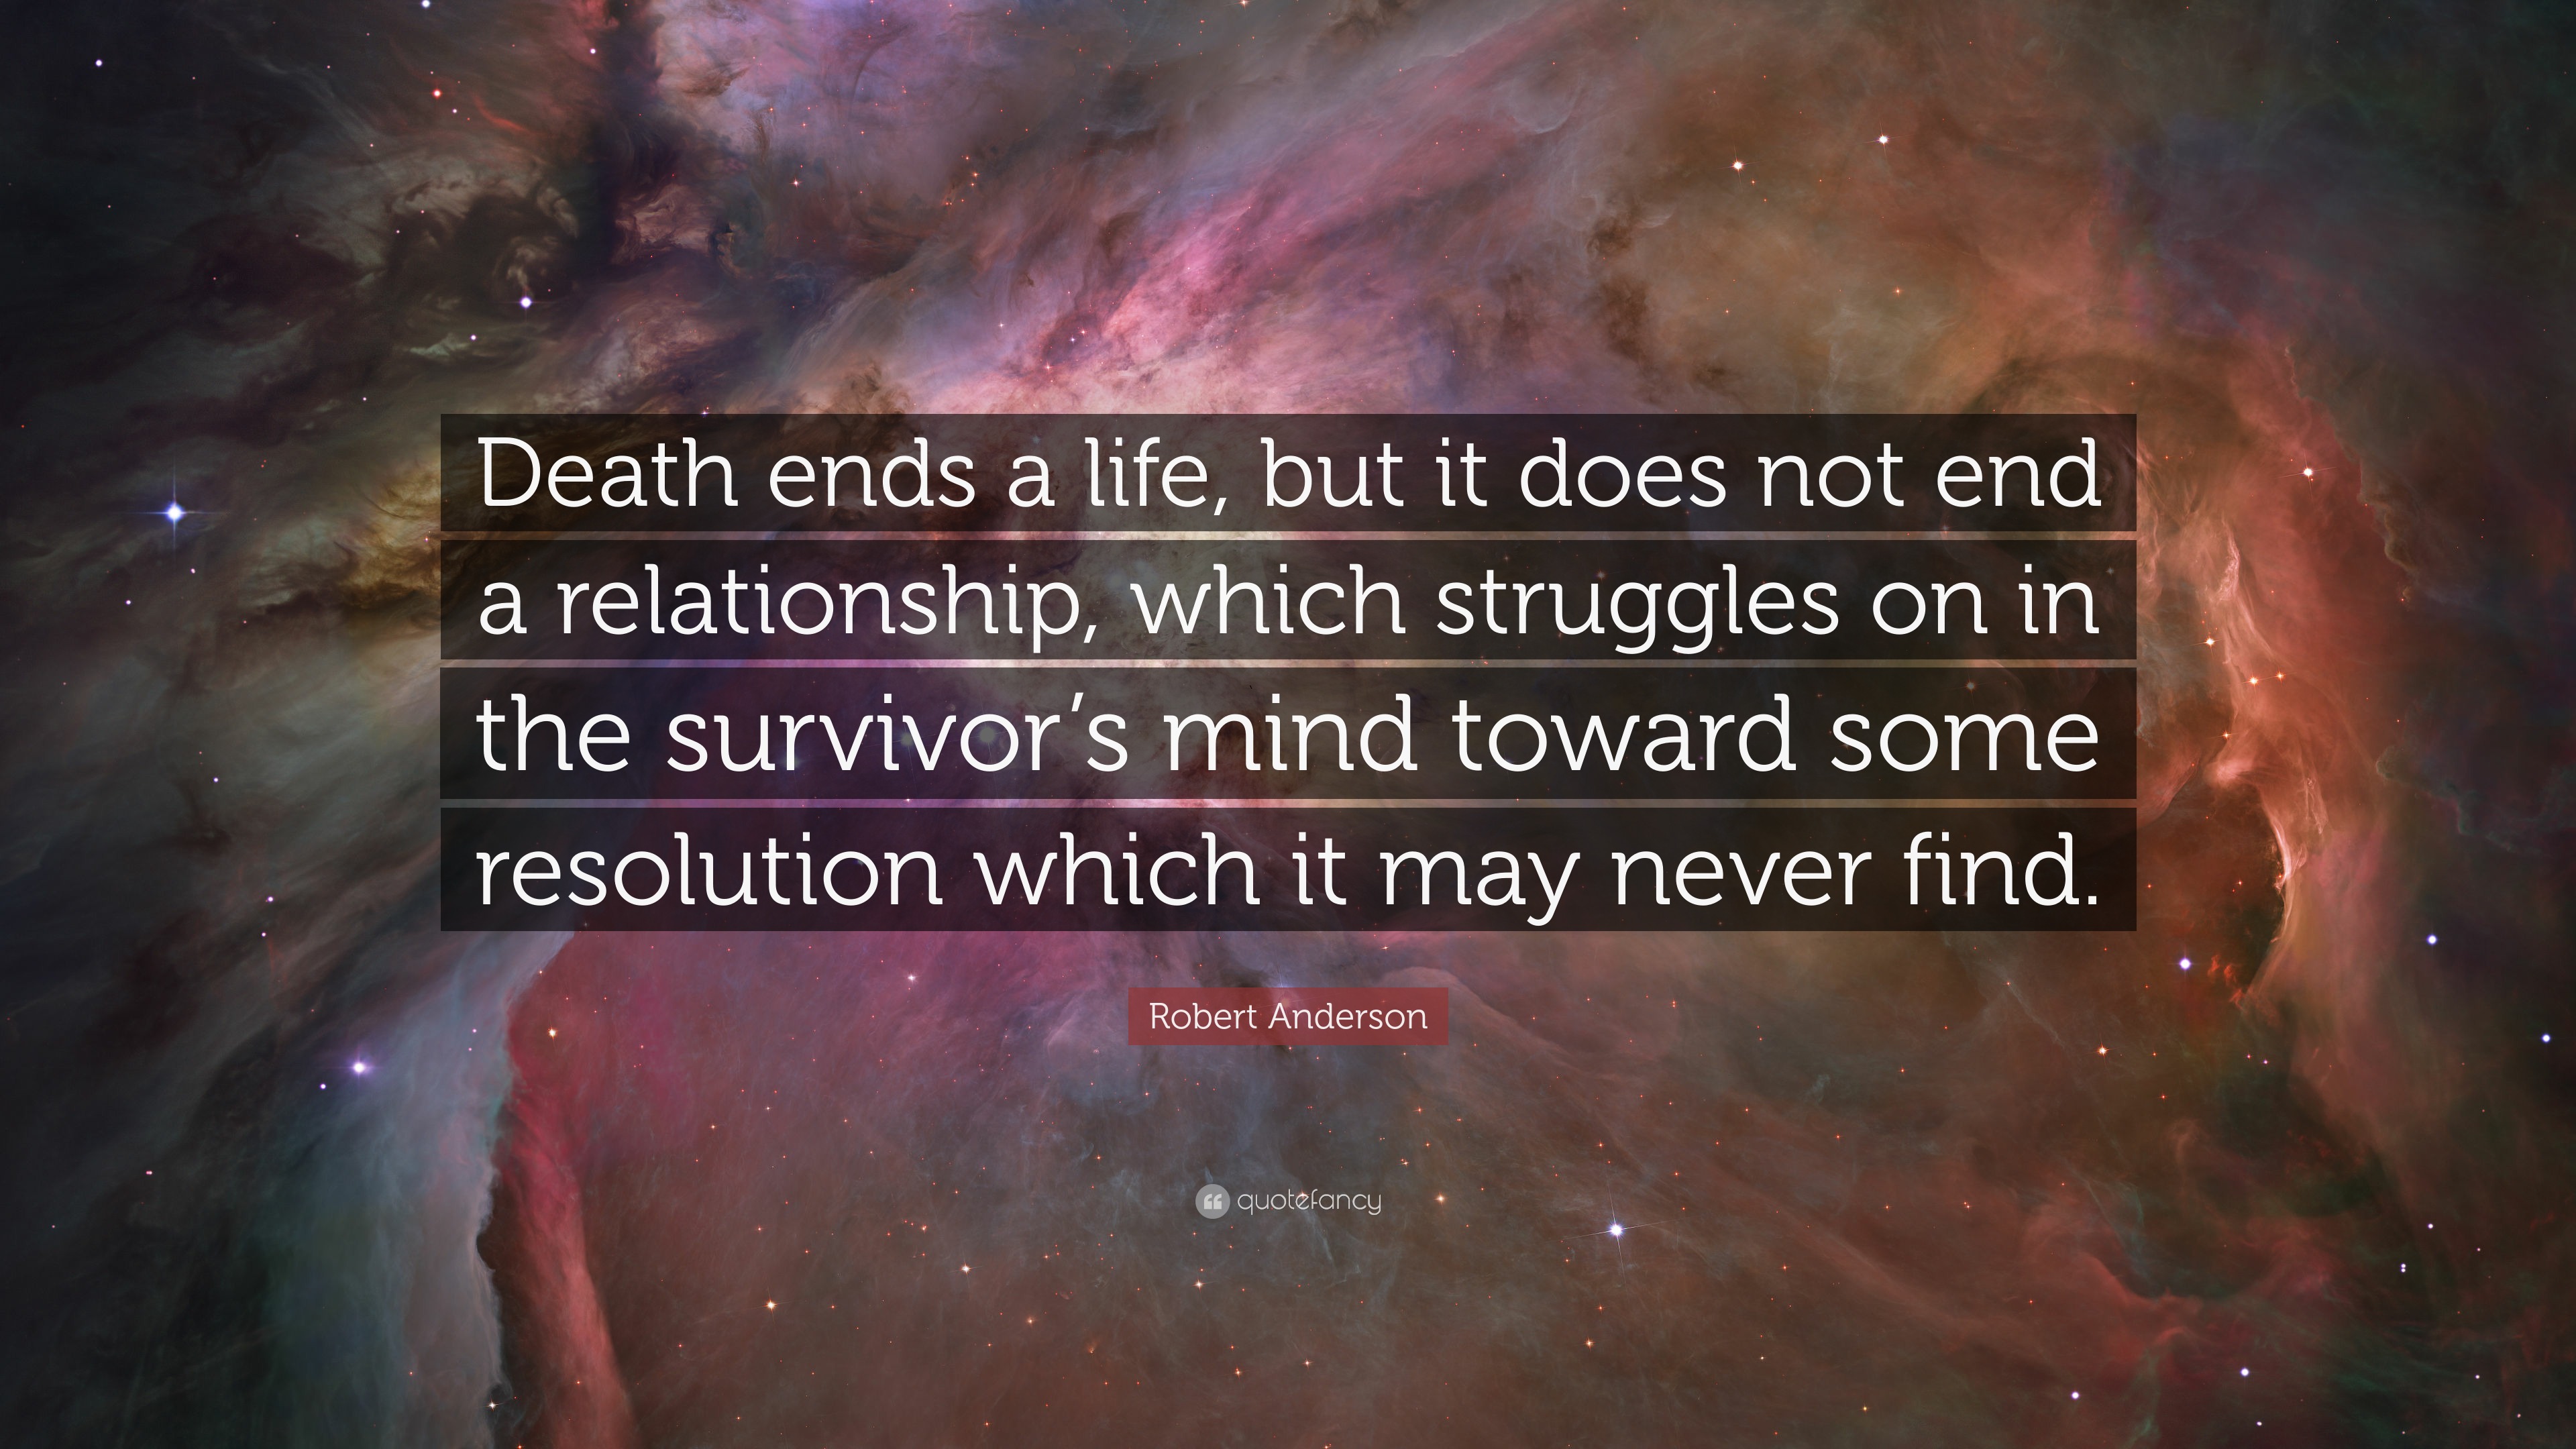 Robert Anderson Quote “Death ends a life but it does not end a